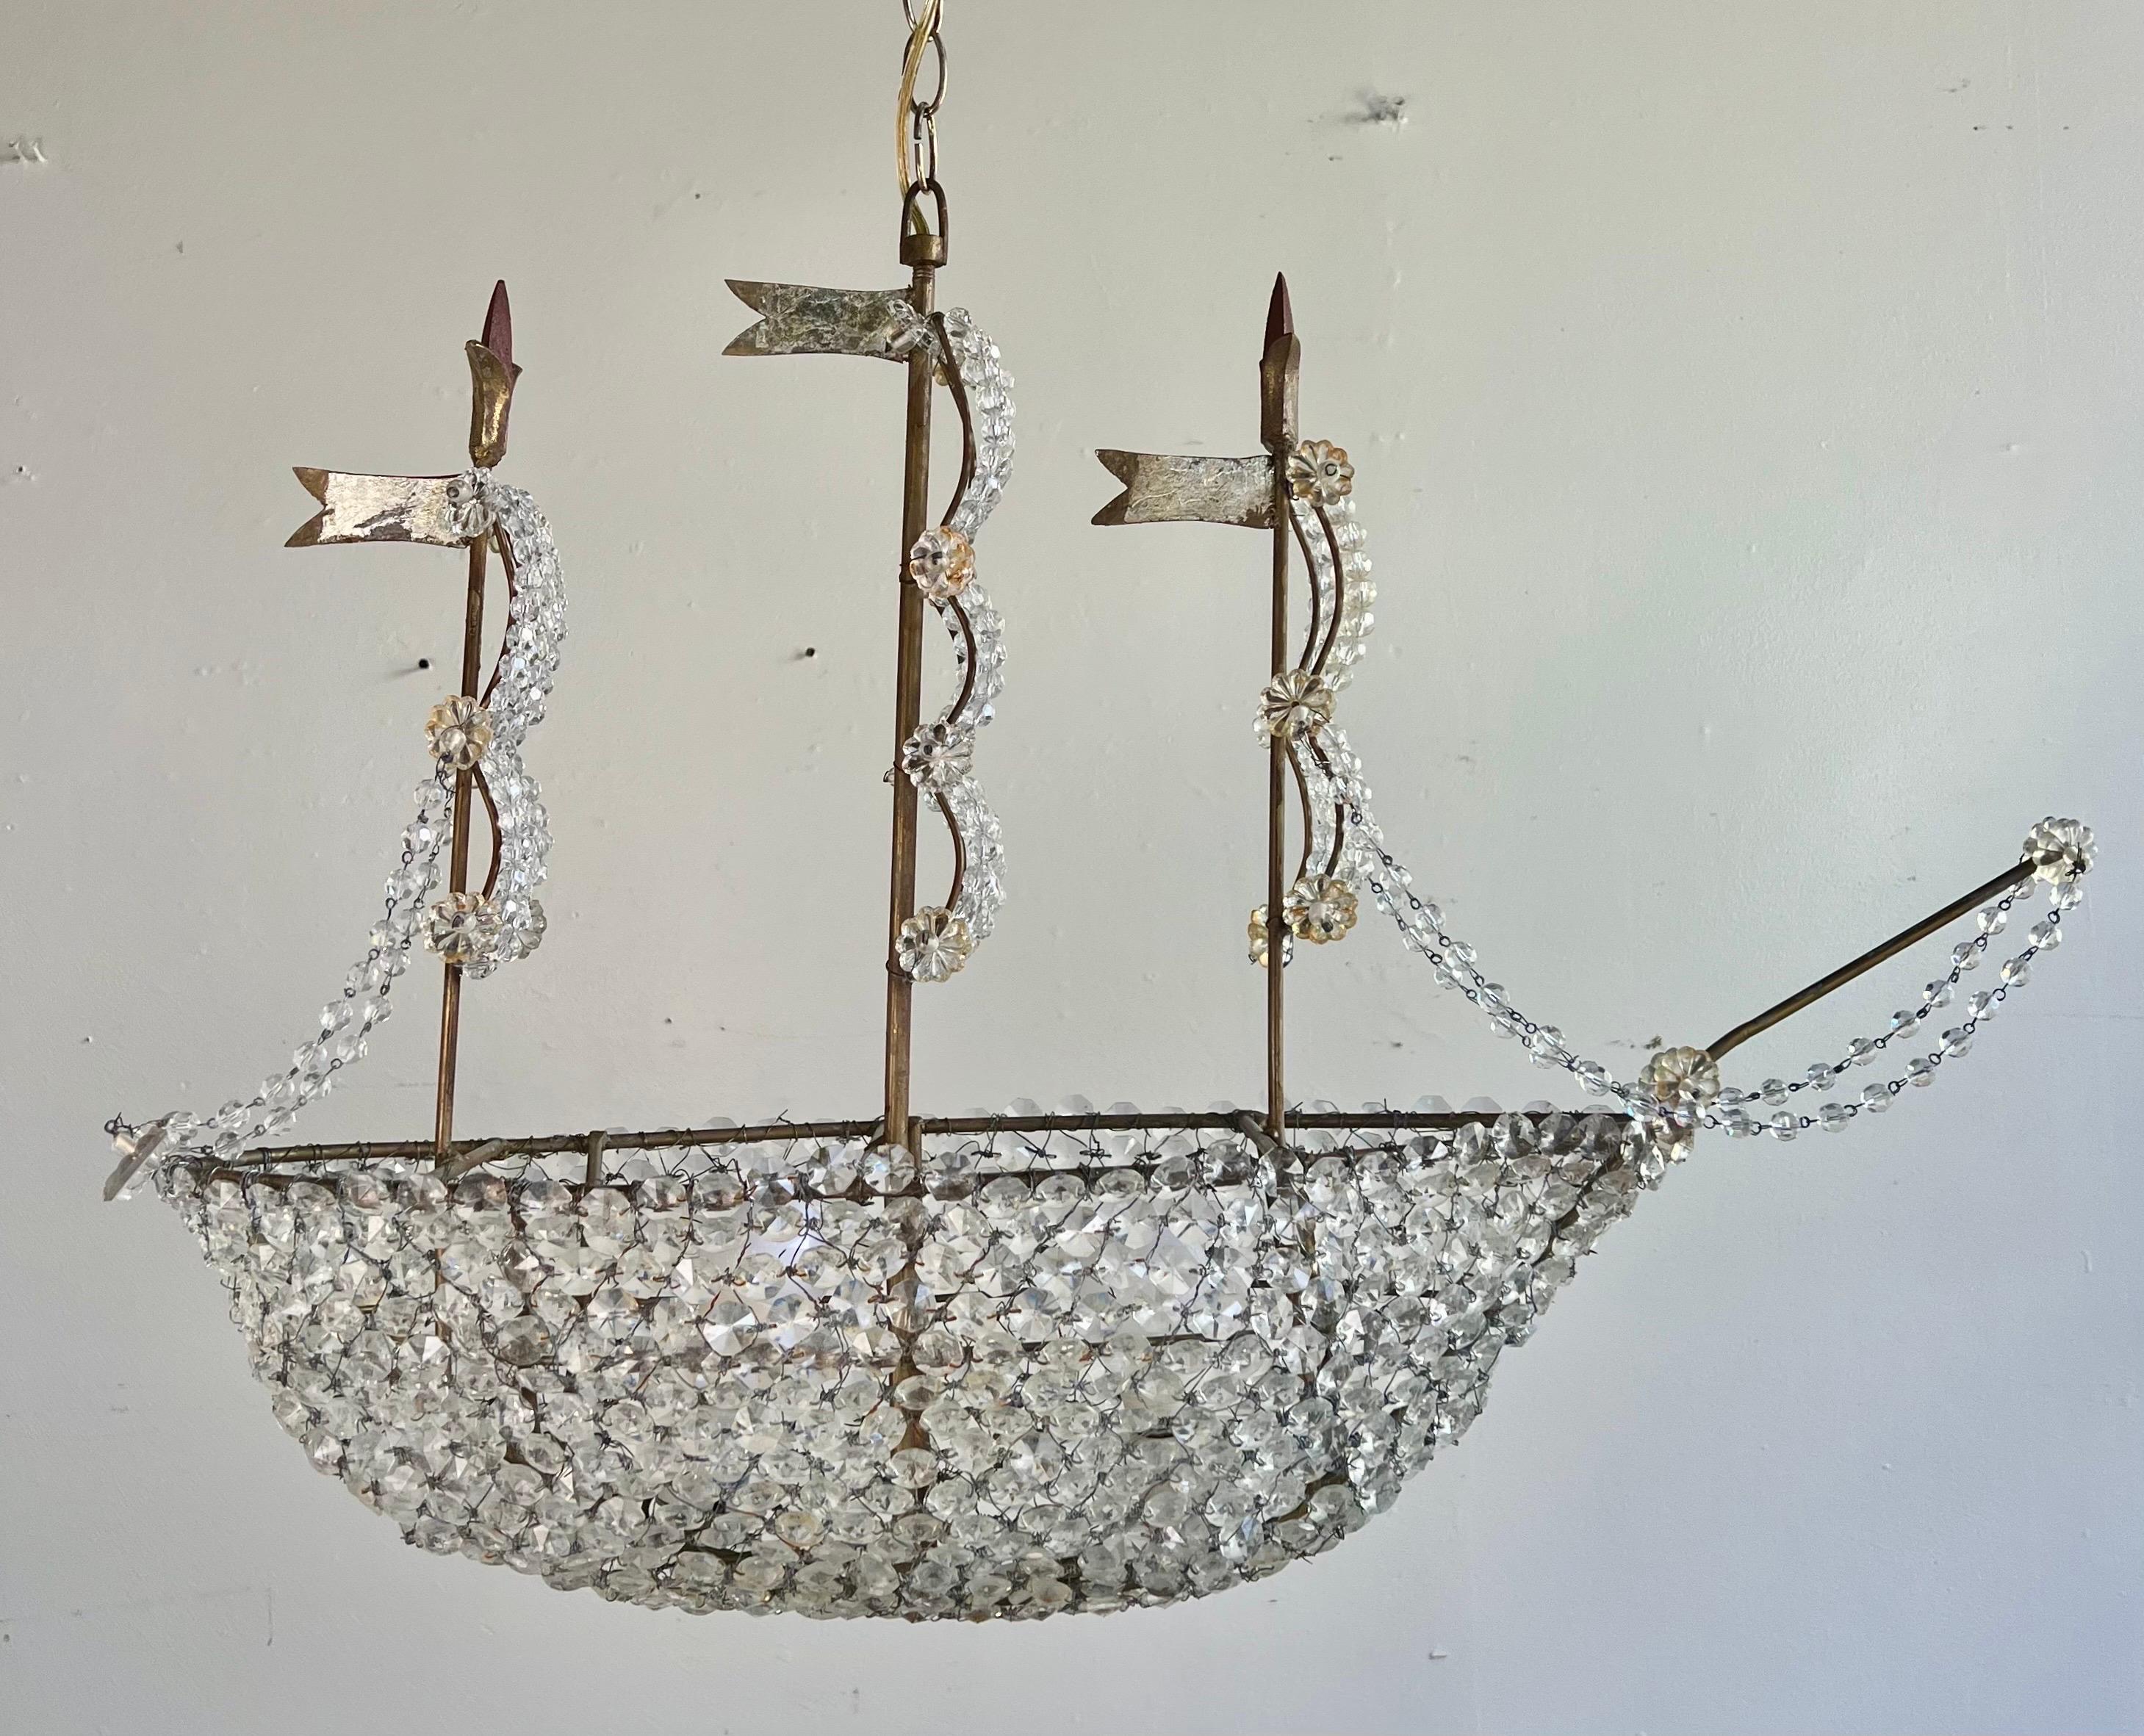 Handmade by Melissa Levinson & Co.  We use the best crystal and crystal beads.
The beads form a ship with three sales blowing in the wind.  This whimsical fixture is all handmade and took weeks to make.  It is quite a beauty. We incorporate